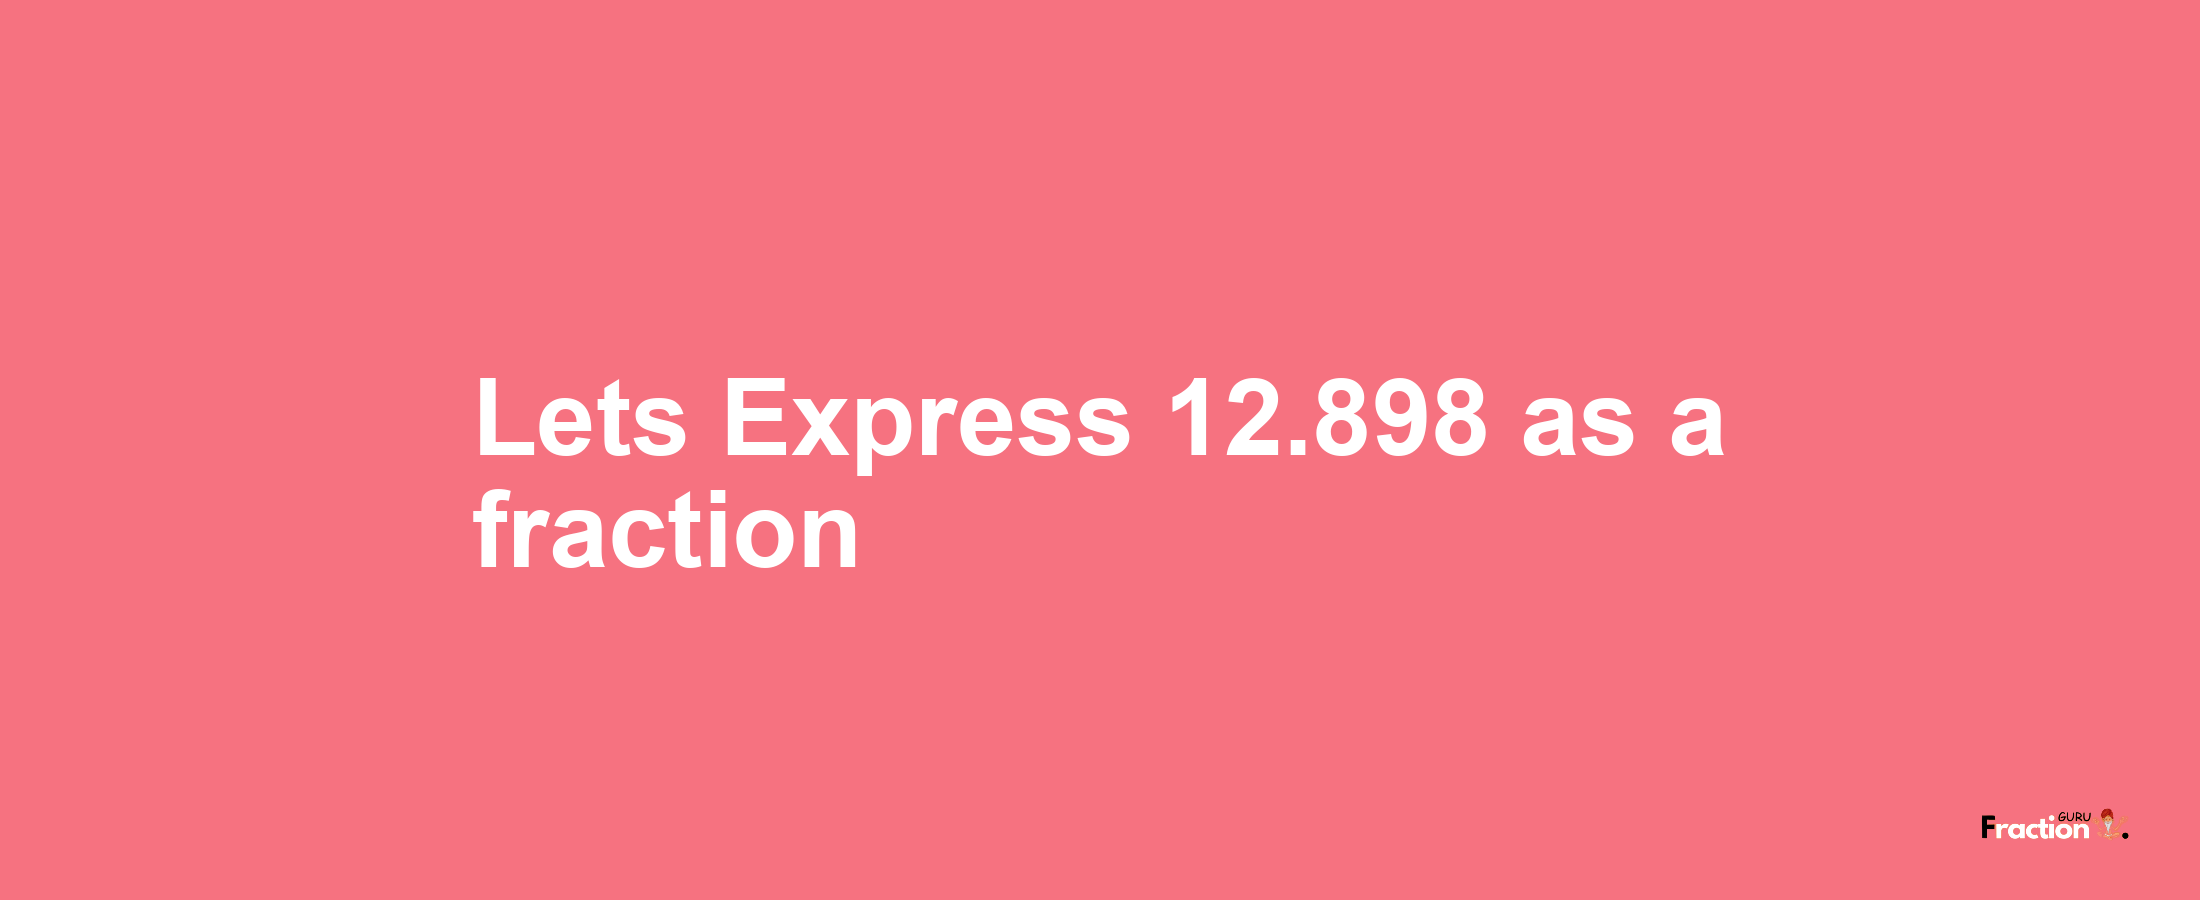 Lets Express 12.898 as afraction